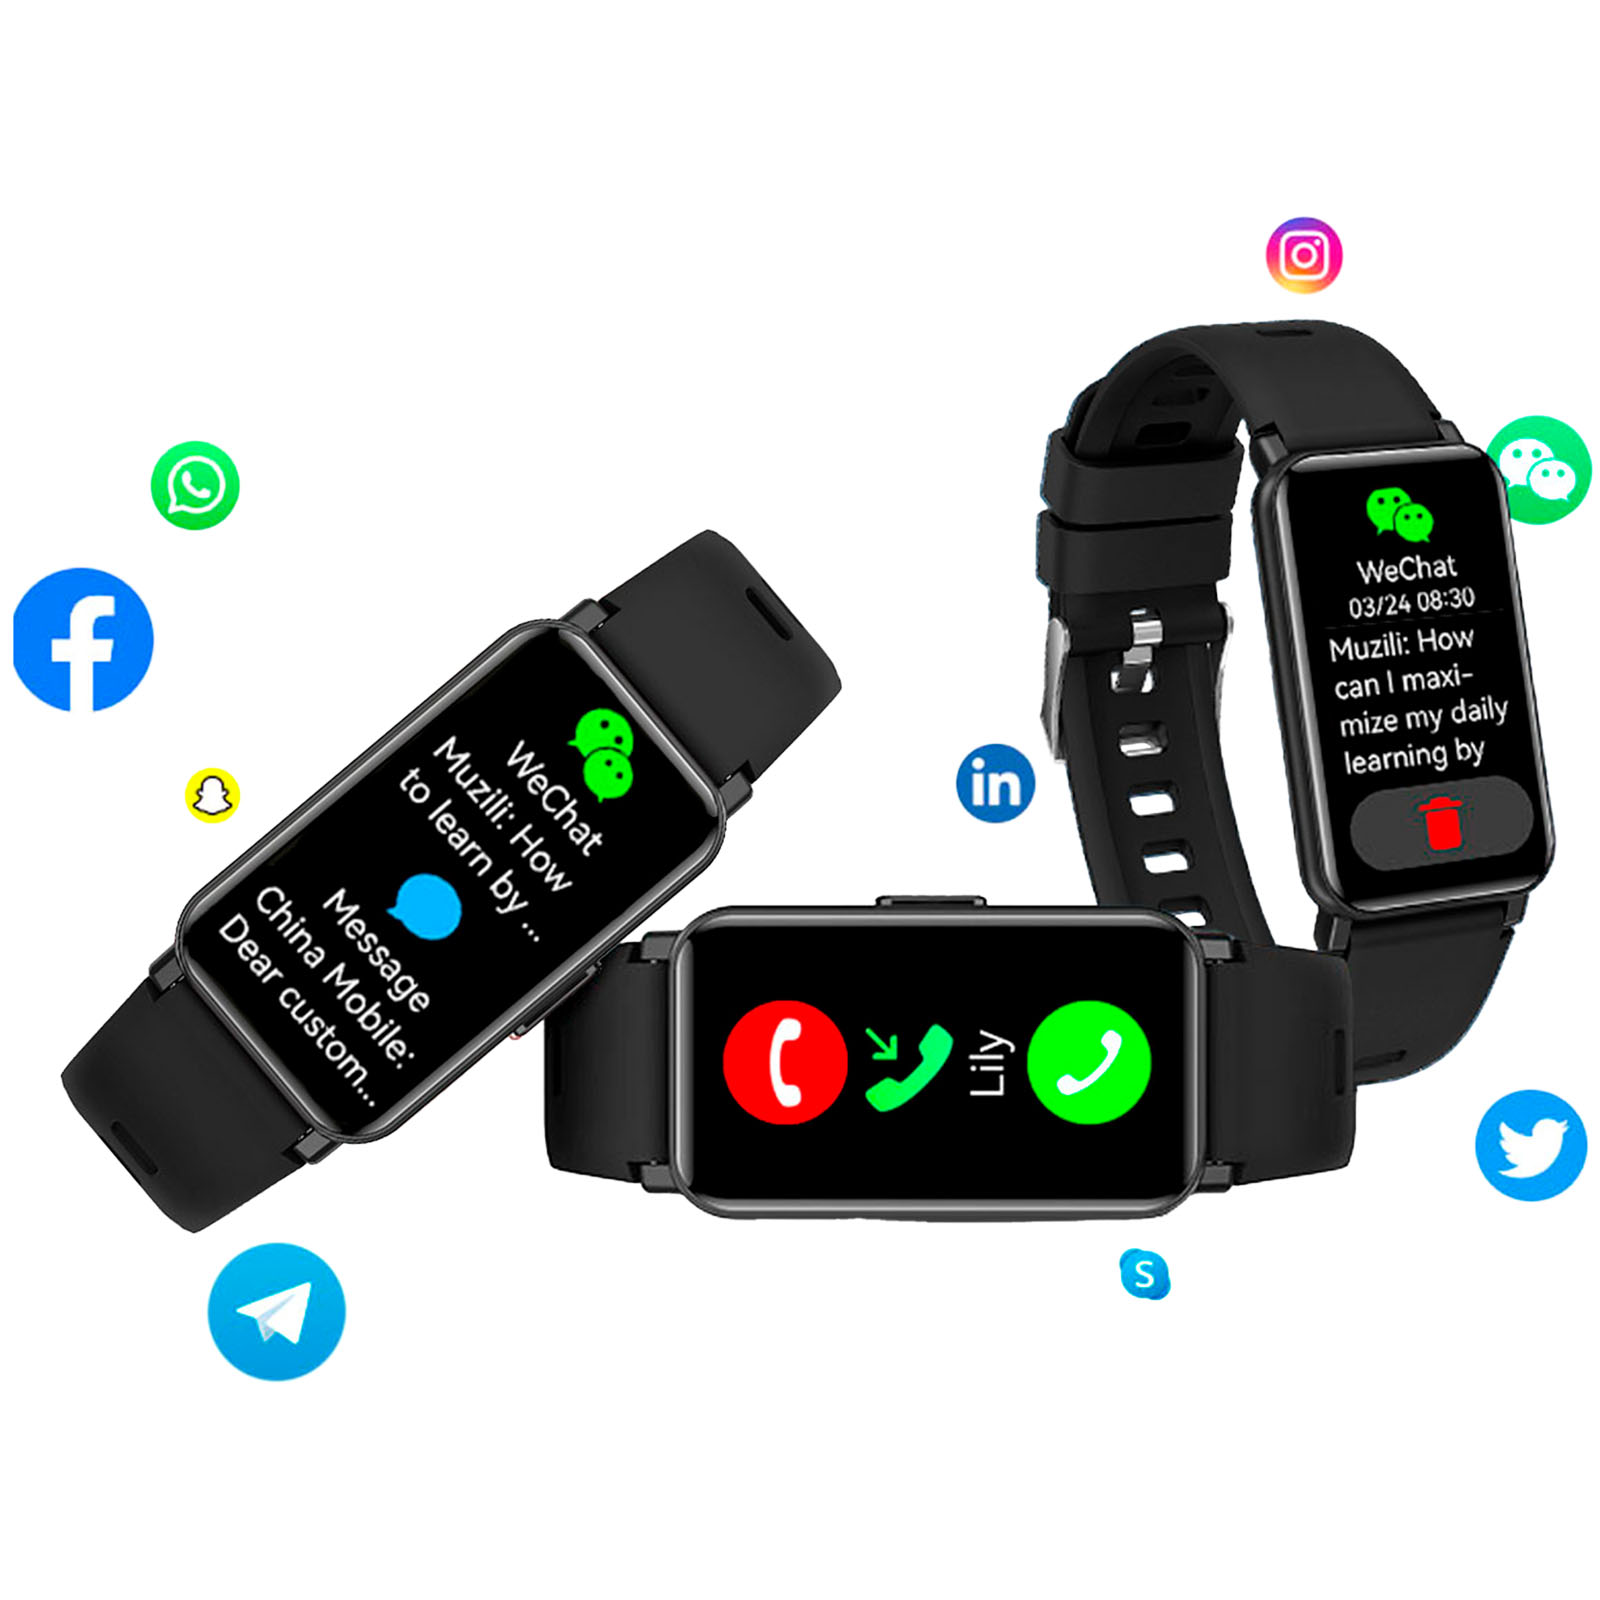 Advertising Smartwatches - Prixton AT806 multisport smartband with GPS - 3